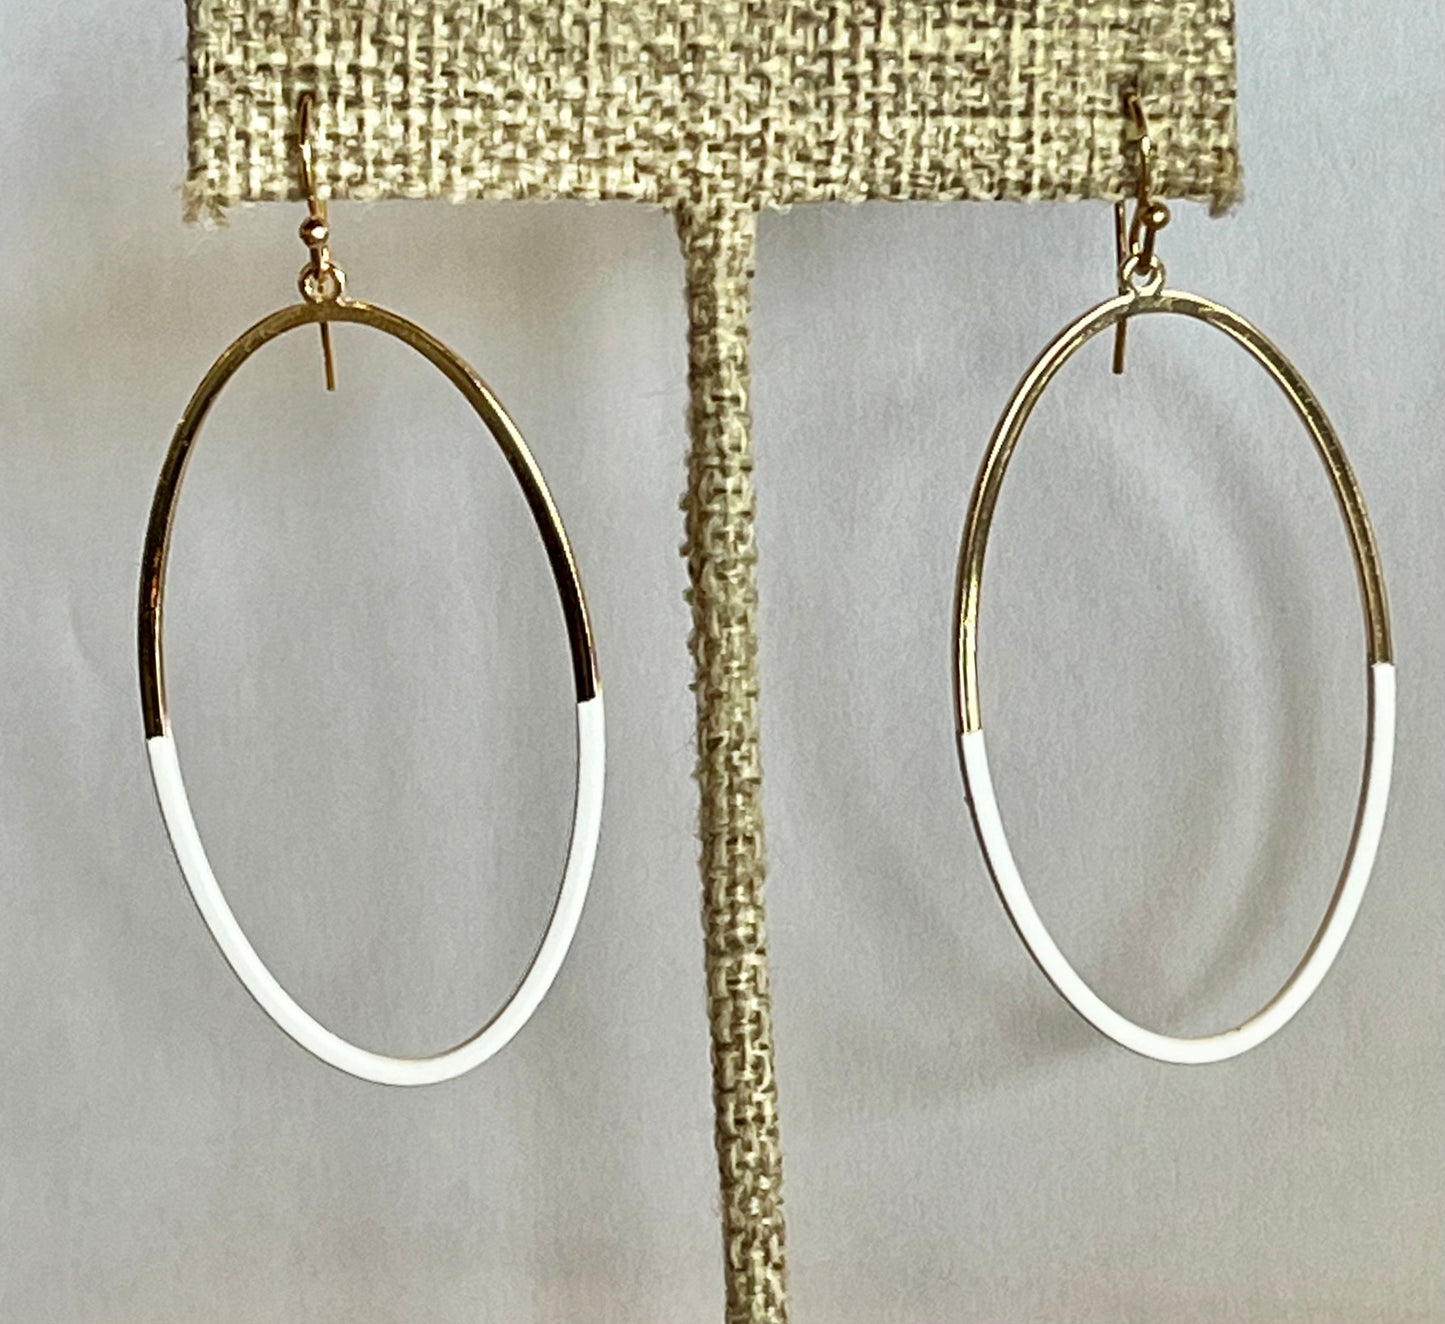 I'm Oval This Earrings